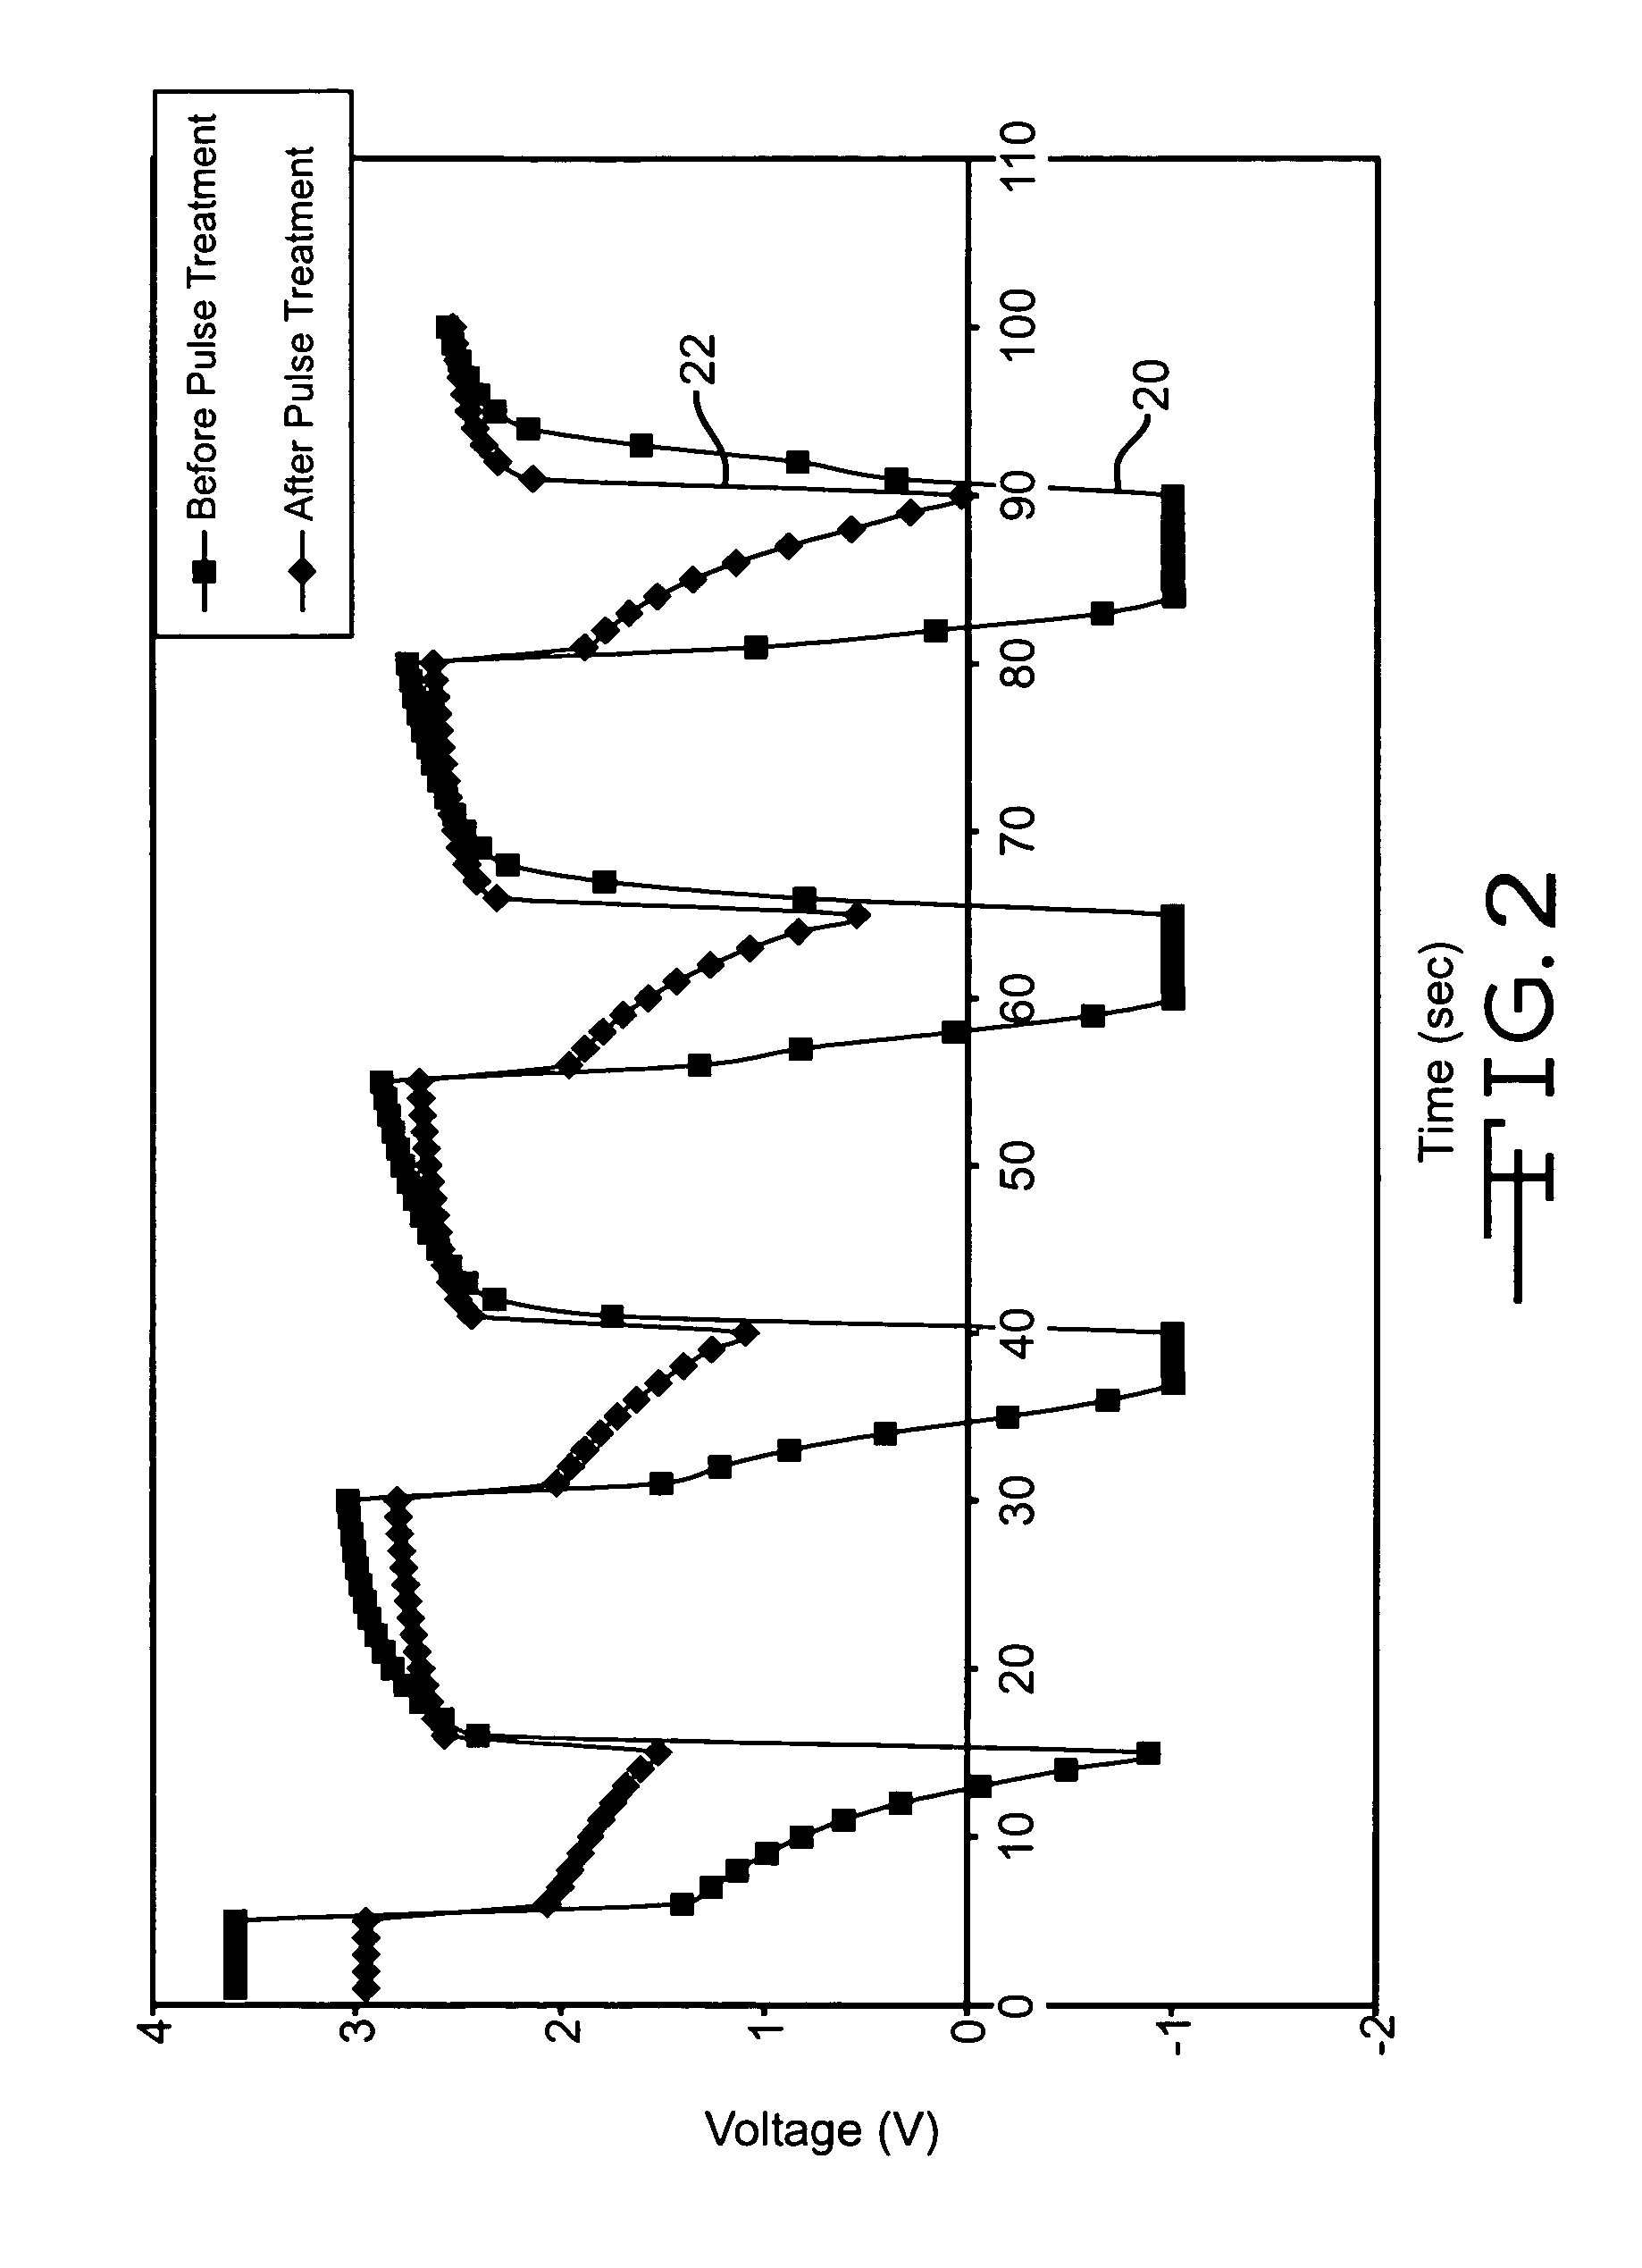 Electrochemical treatment method to reduce voltage delay and cell resistance in lithium/silver vanadium oxide cells